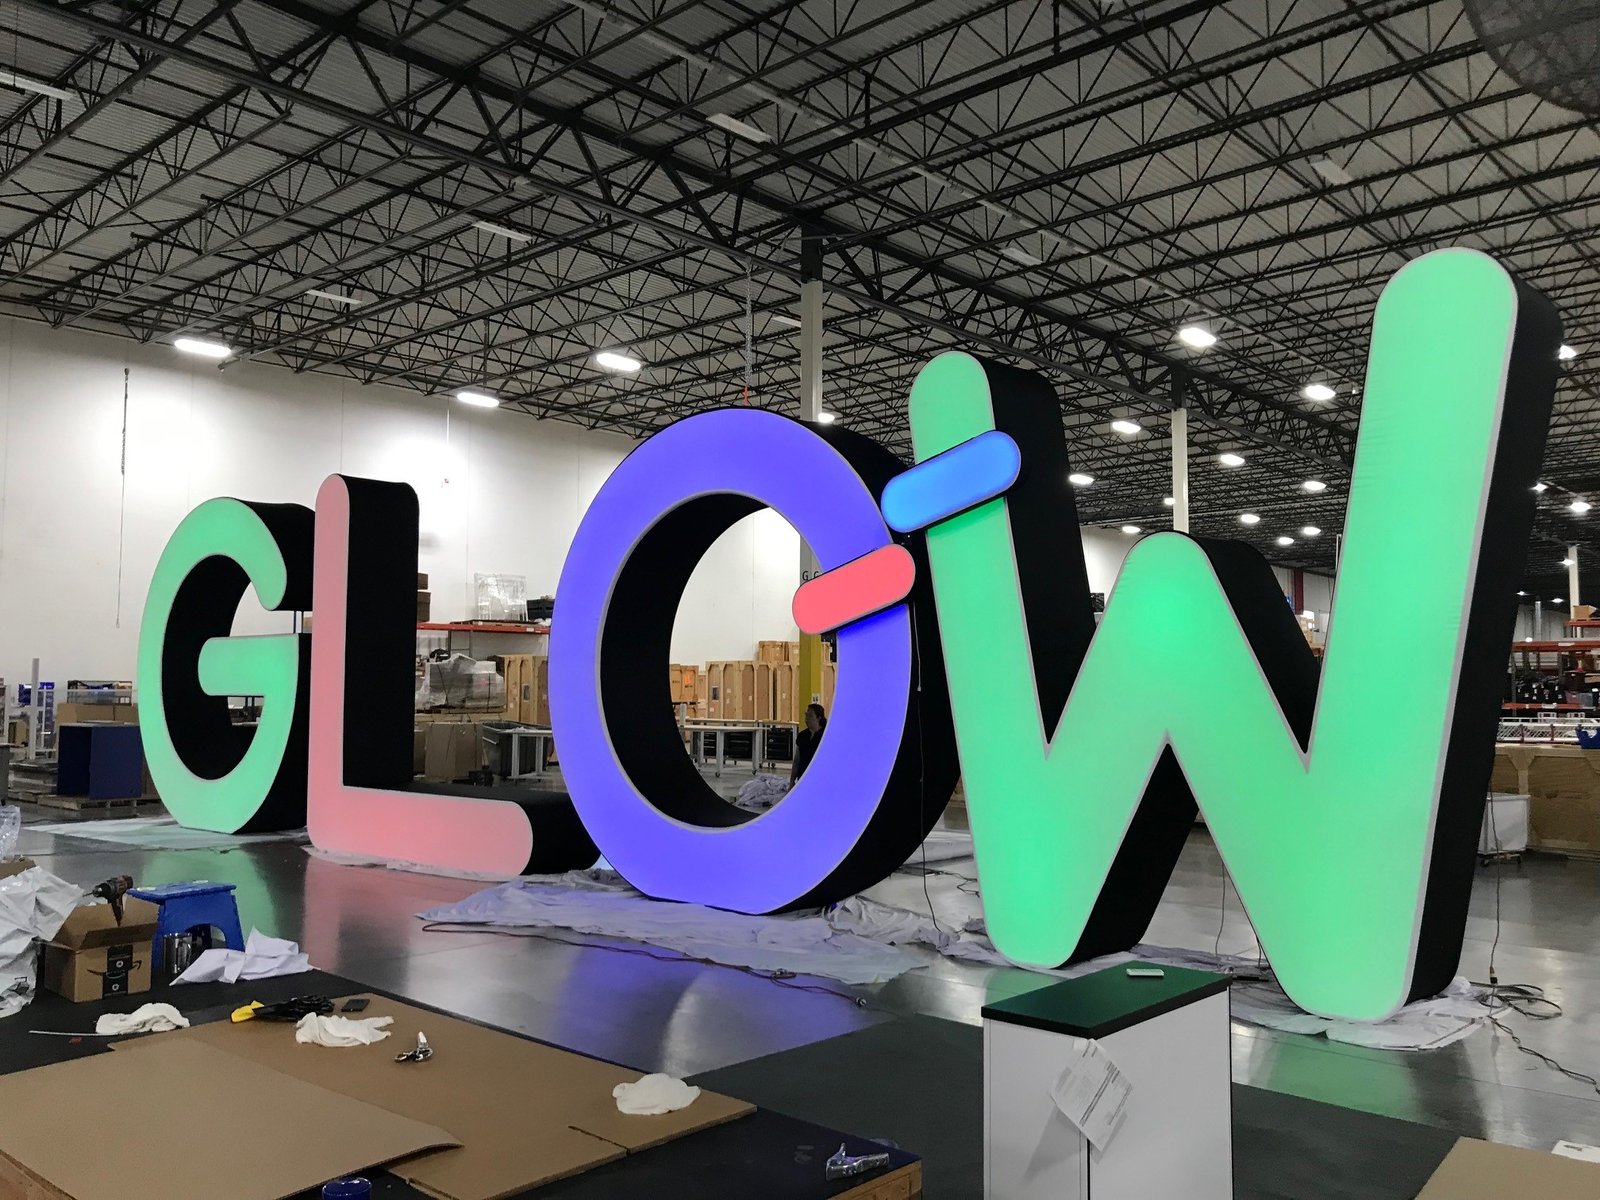 16 foot tall dimensional letters made from tube and fabric that spell GLOW. These are illuminated from inside the structure and look amazing.